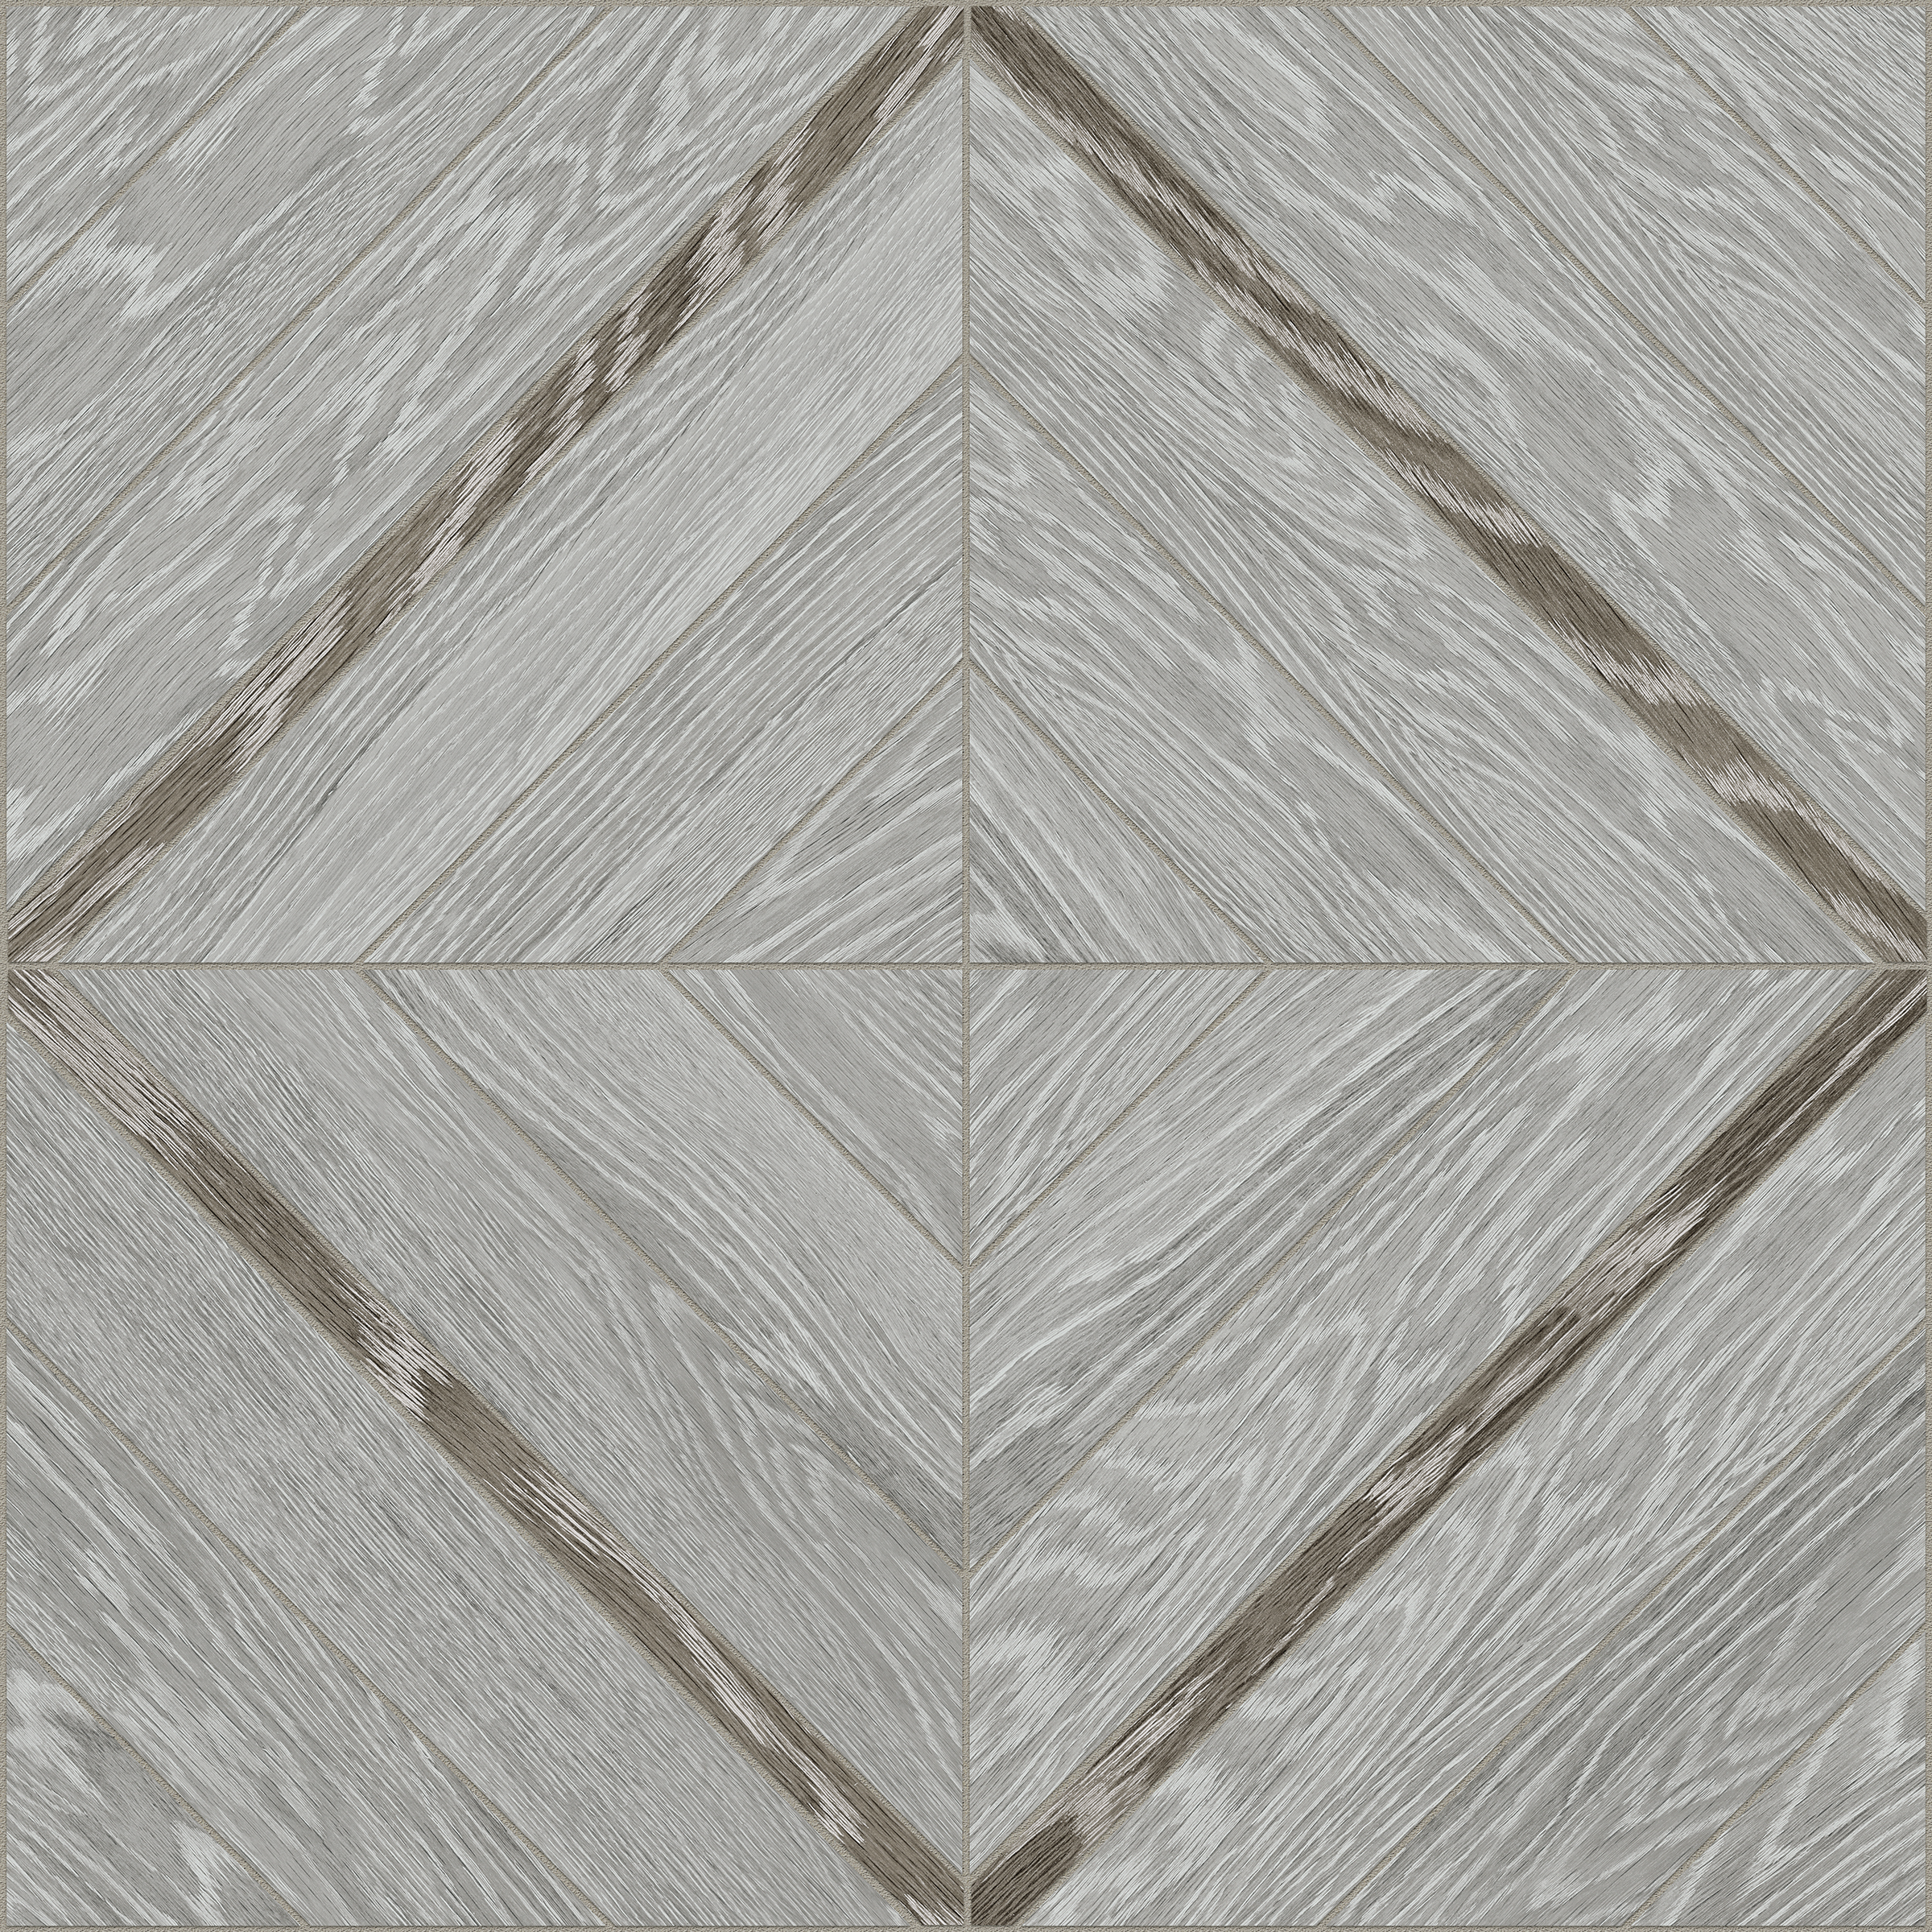 ash marquetry pattern glazed porcelain mosaic from aspen anatolia collection distributed by surface group international matte finish straight edge edge mesh shape